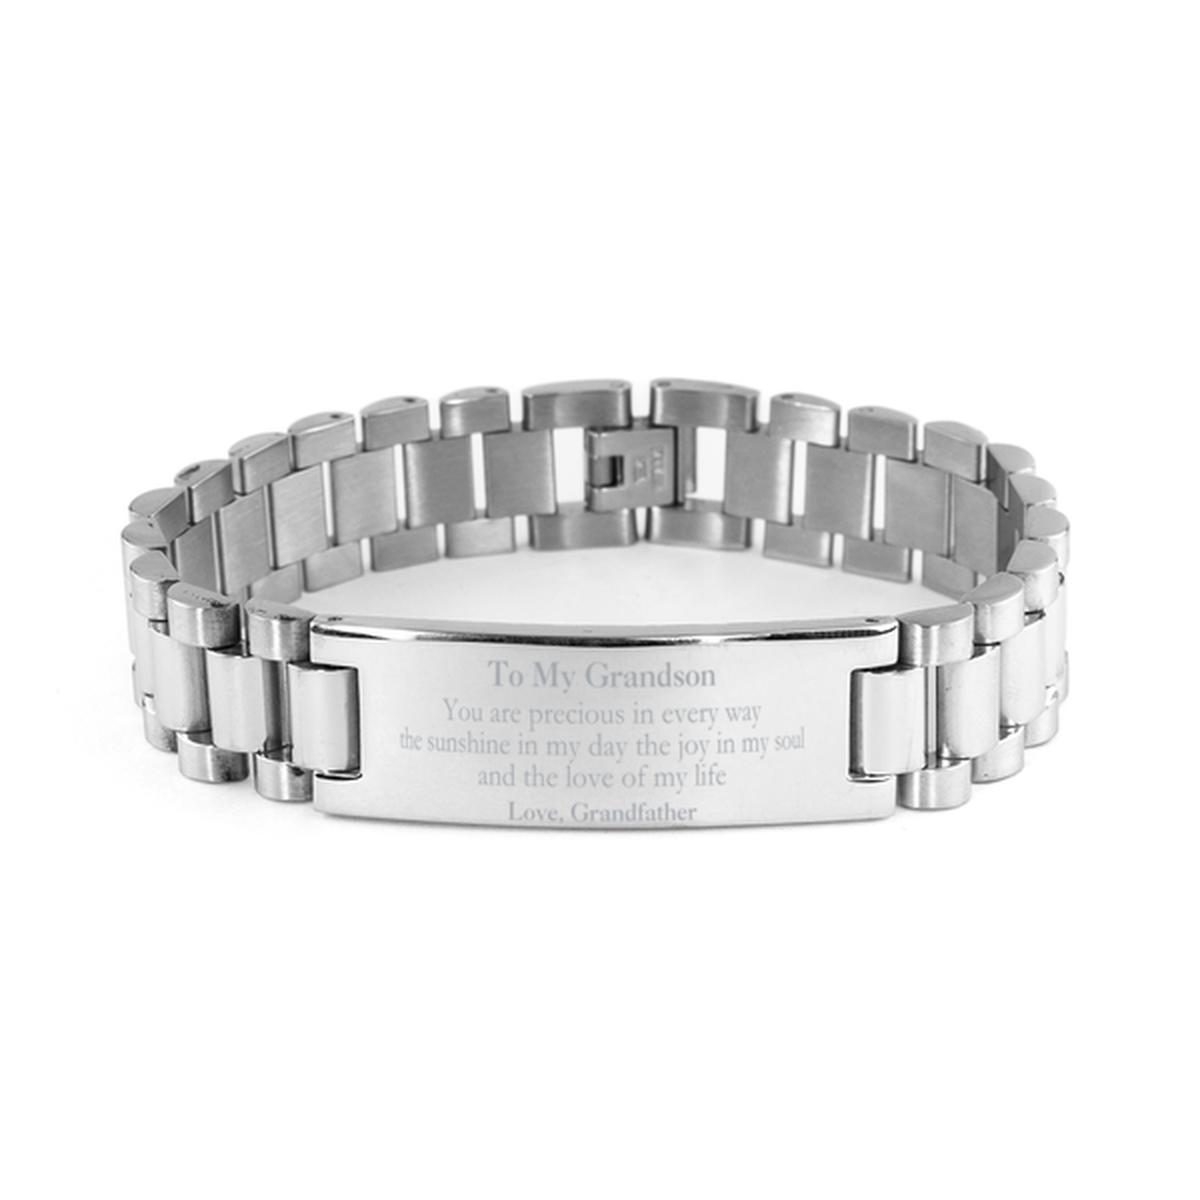 Graduation Gifts for Grandson Ladder Stainless Steel Bracelet Present from Grandfather, Christmas Grandson Birthday Gifts Grandson You are precious in every way the sunshine in my day. Love, Grandfather